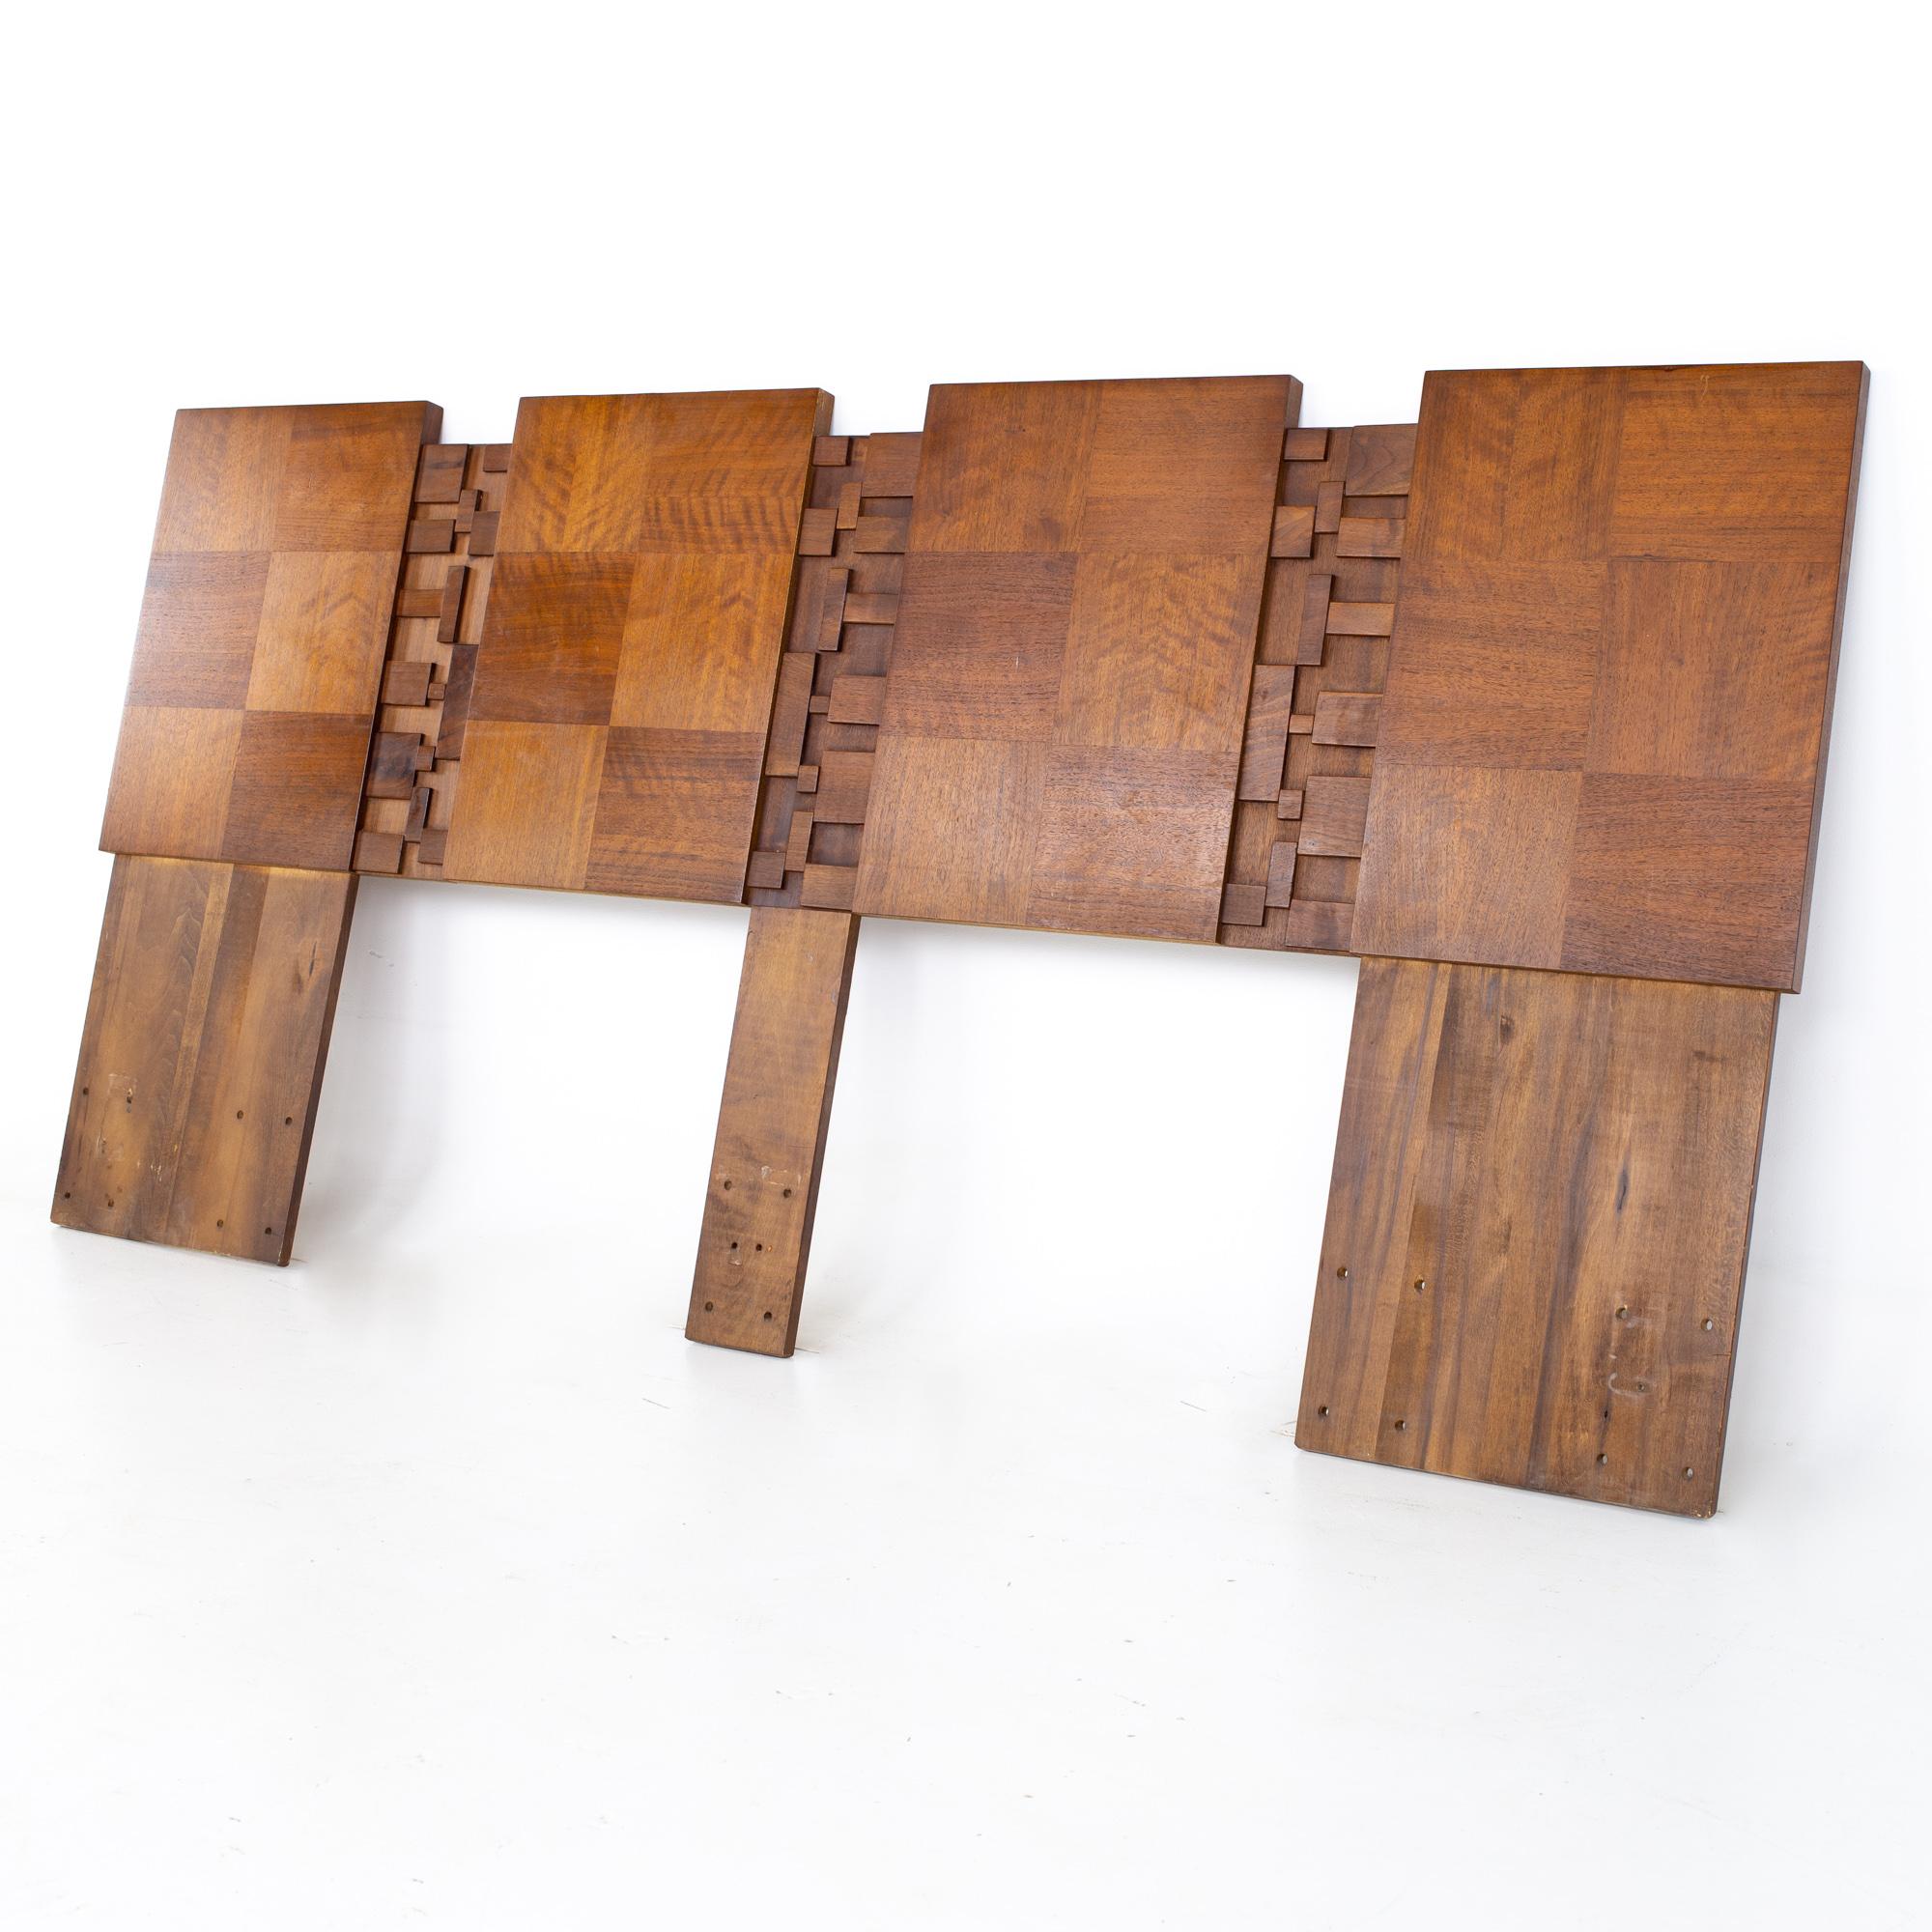 Lane Brutalist Mid Century walnut king headboard
Headboard measures: 82.5 wide x 2 deep x 40 inches high

All pieces of furniture can be had in what we call restored vintage condition. That means the piece is restored upon purchase so it’s free